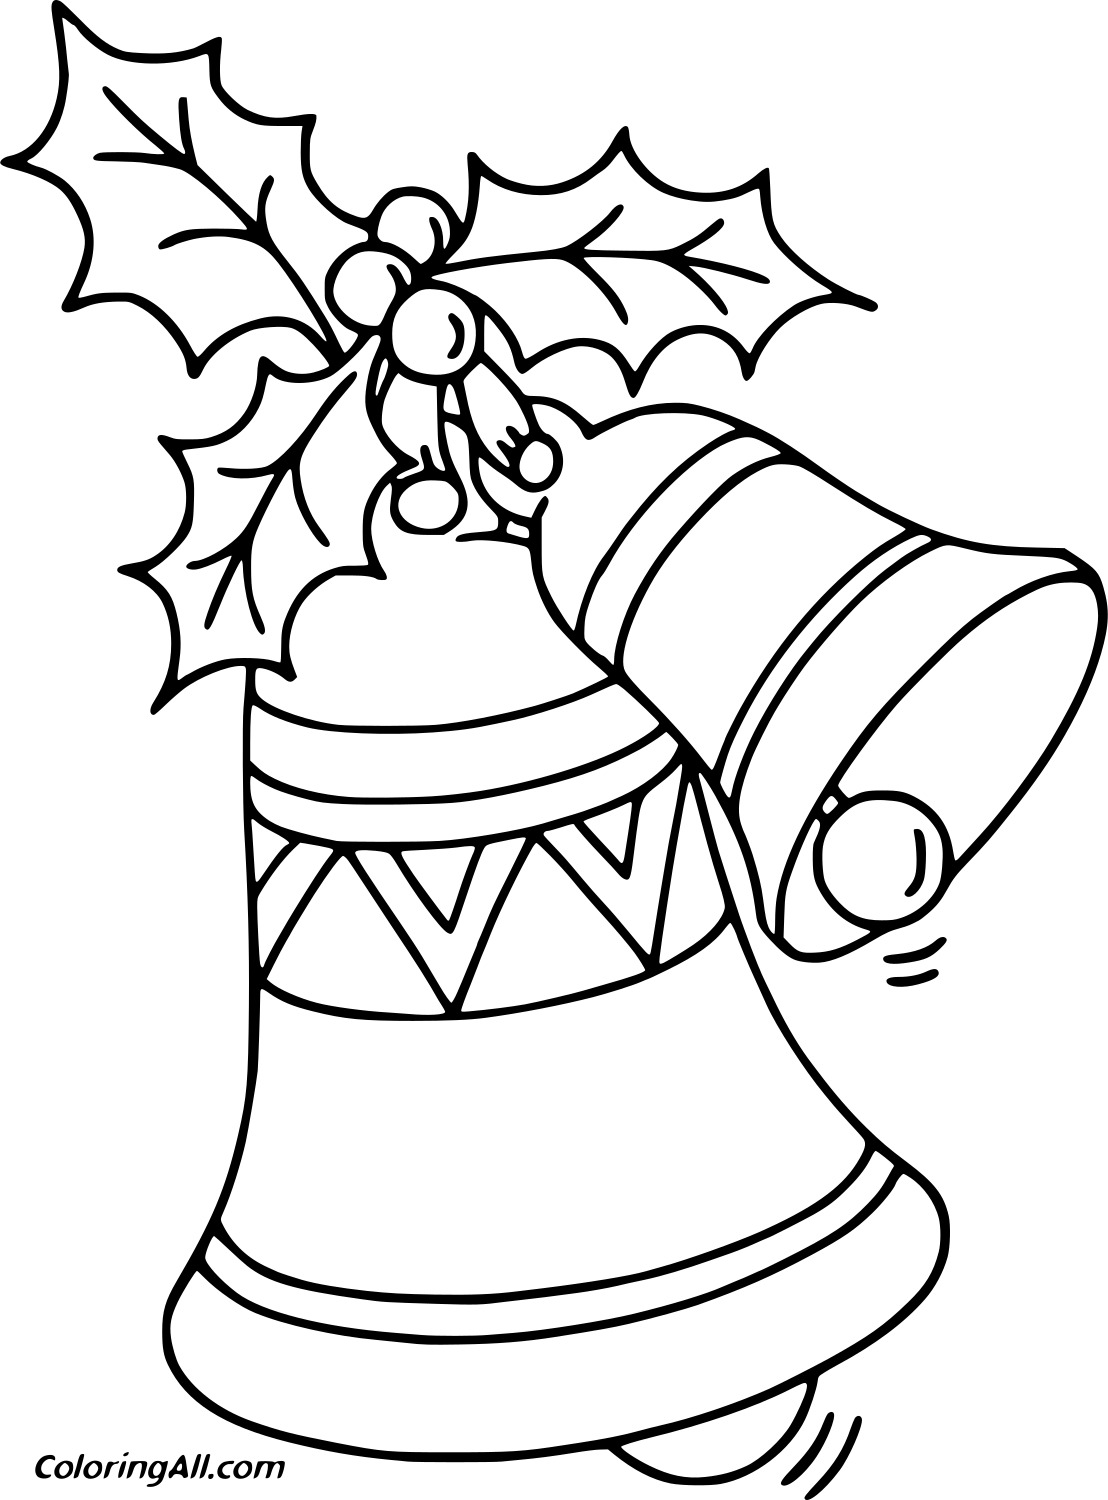 Big Bell And Small Bell For Children Coloring Page